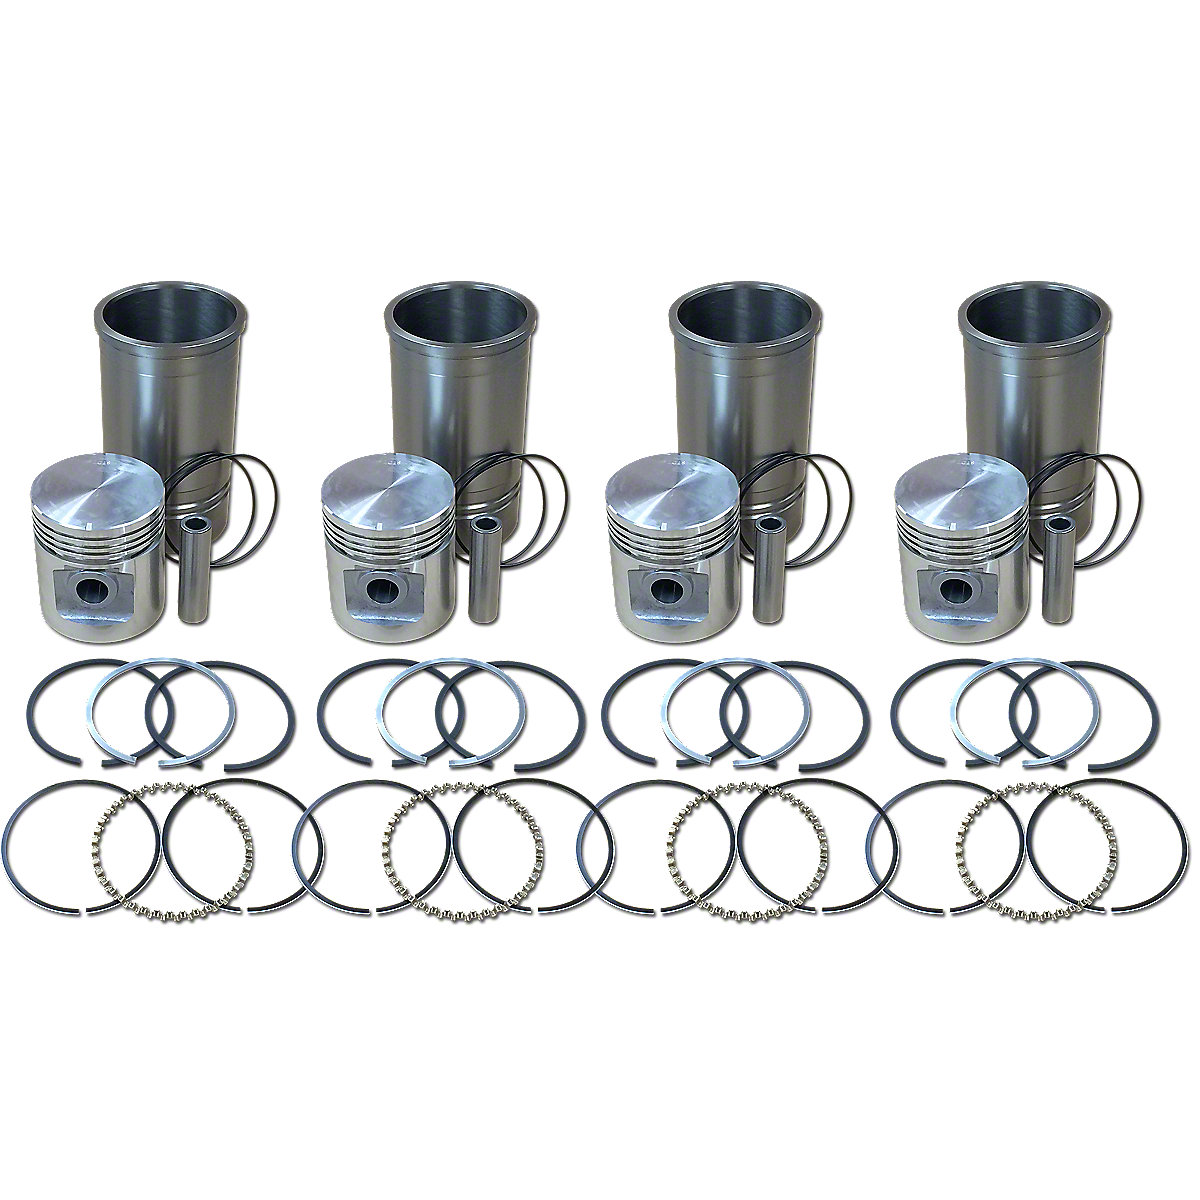 3-7/16 Overbore  Piston And Sleeve Kit For Allis Chalmers: B, C, CA, IB, RC.